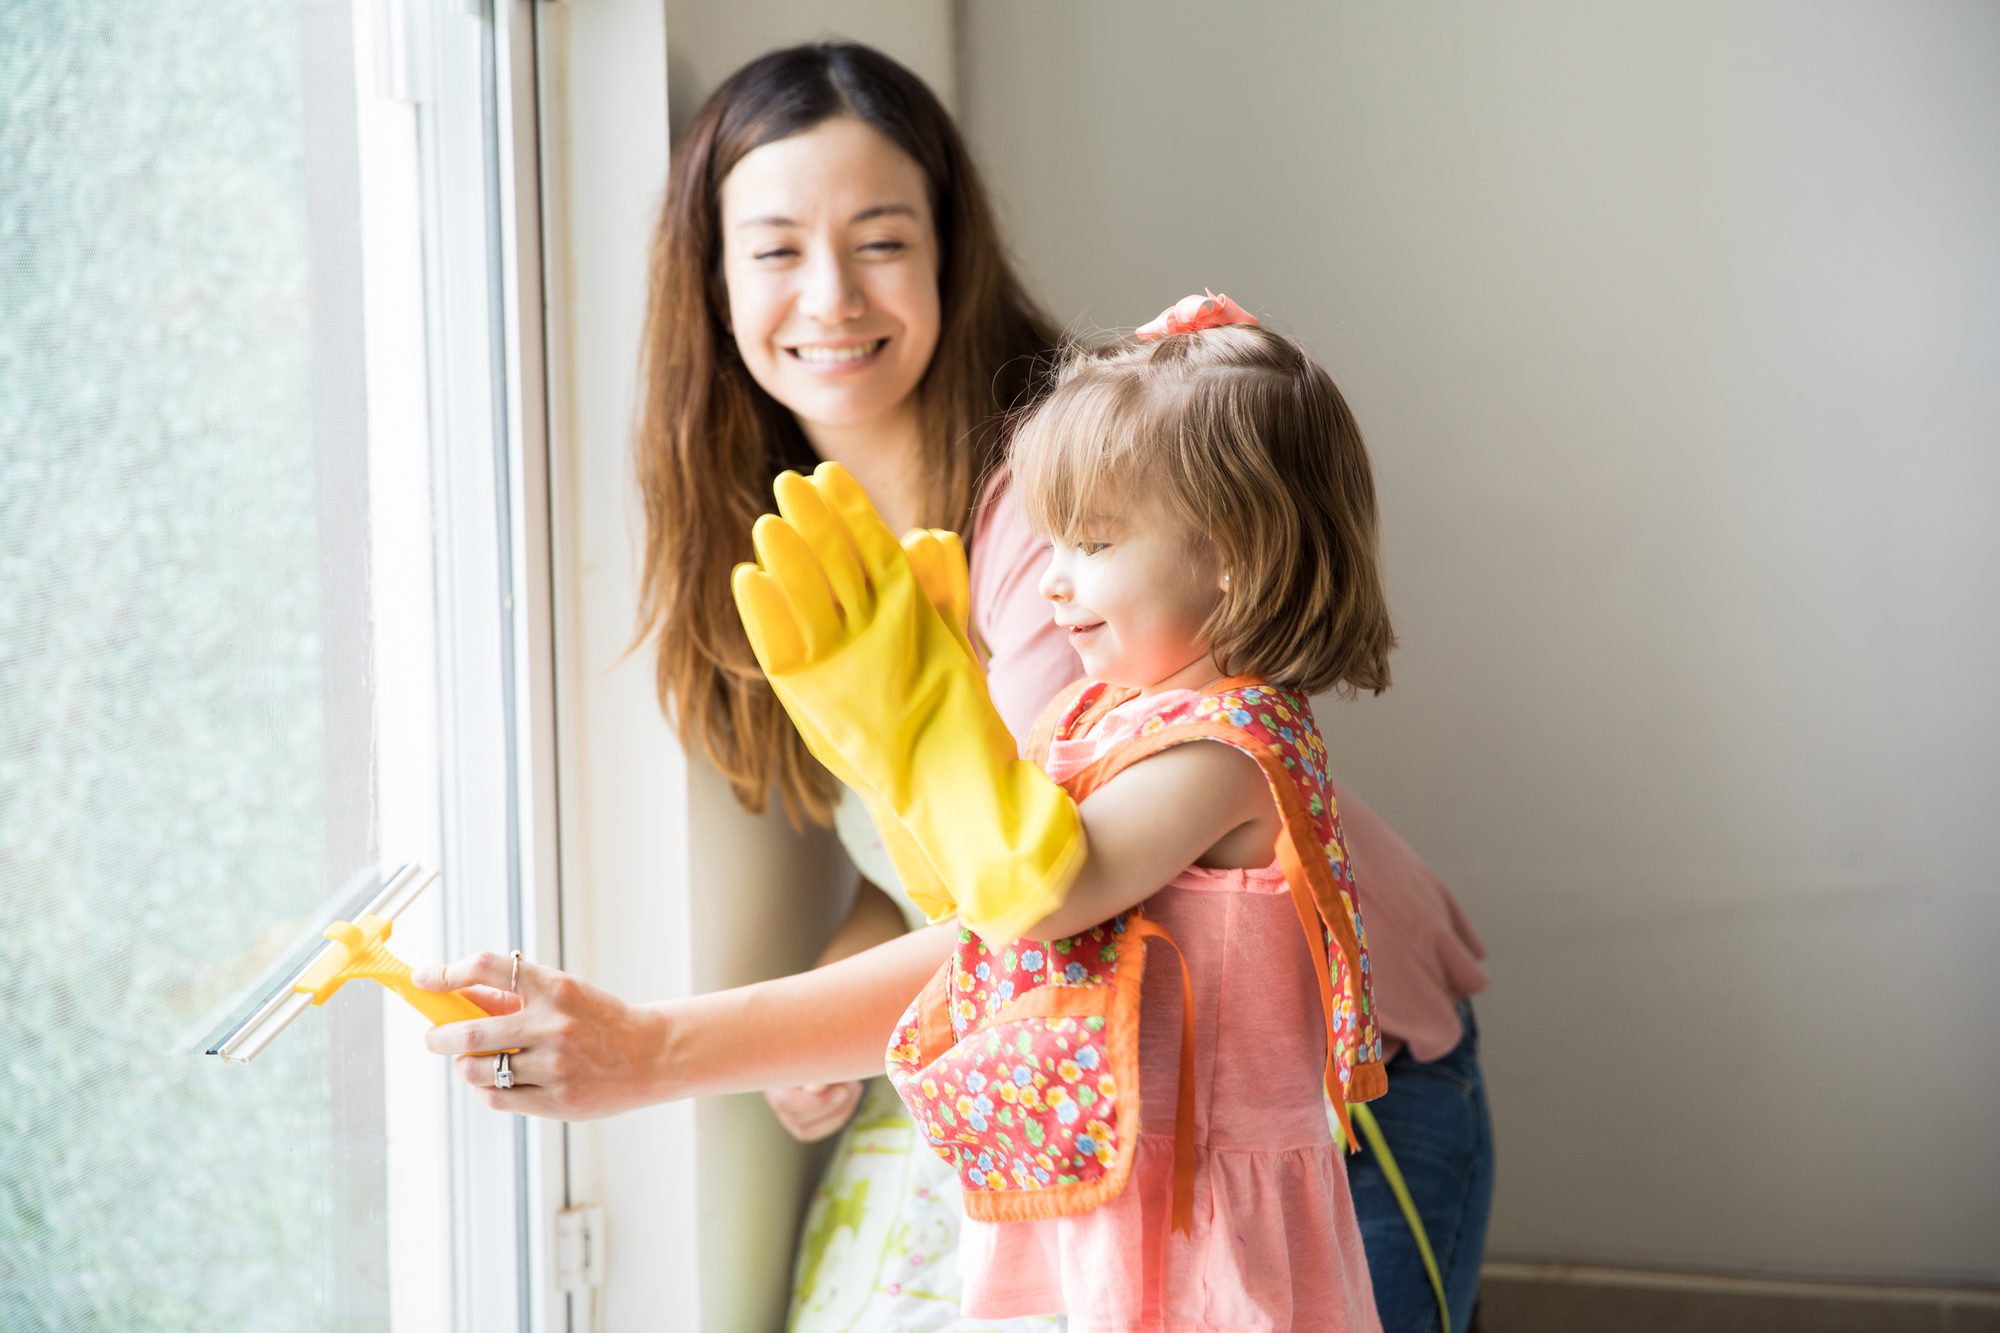 A mother and daughter cleaning a window